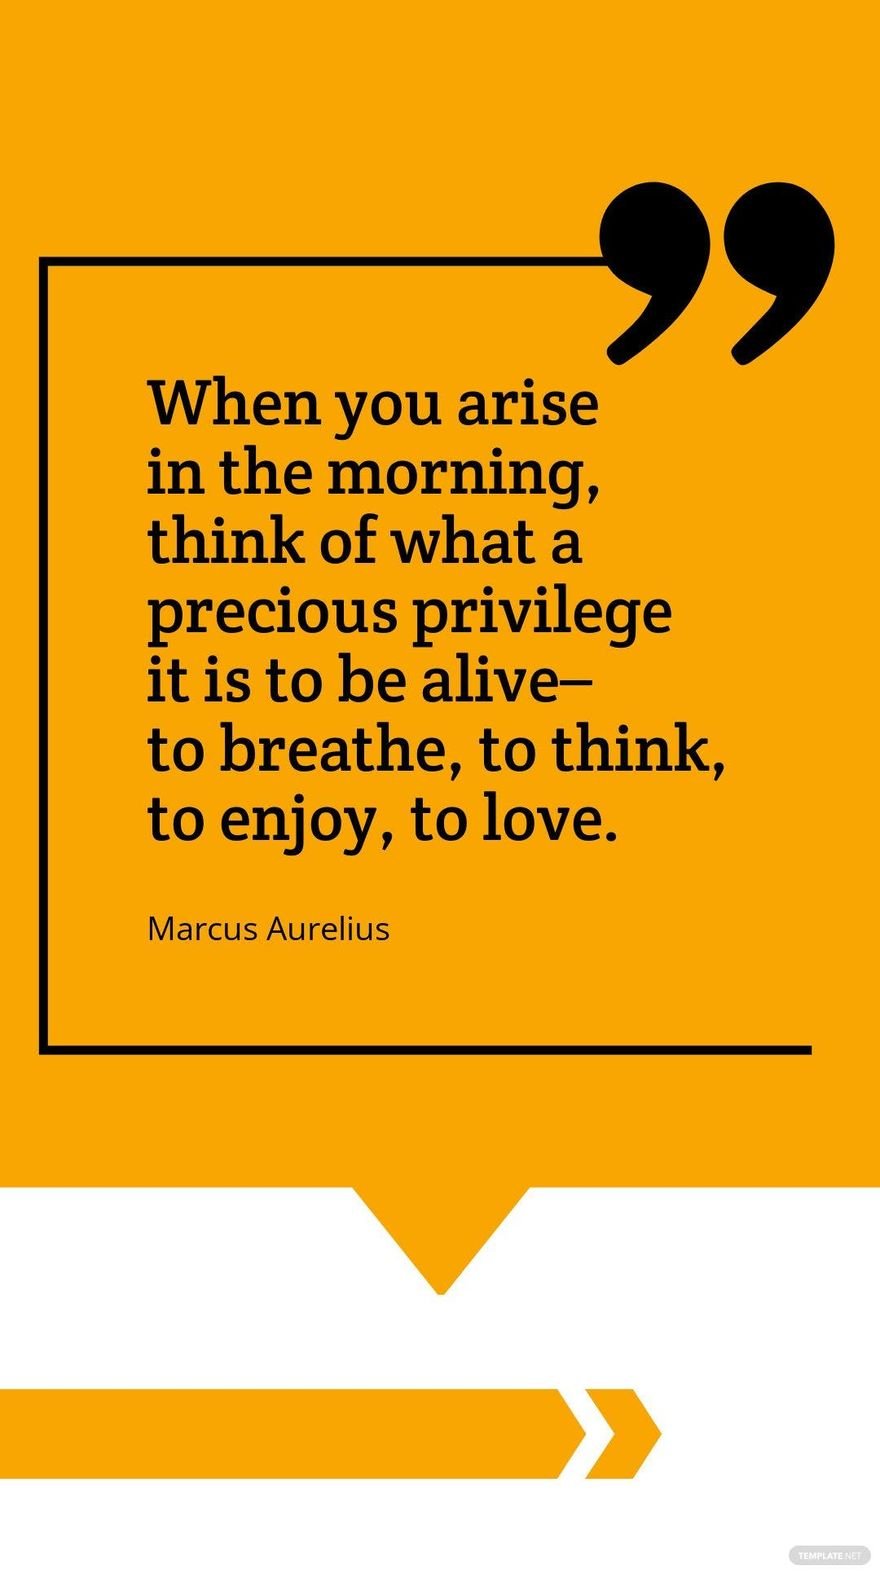 Marcus Aurelius - When you arise in the morning, think of what a precious privilege it is to be alive – to breathe, to think, to enjoy, to love.